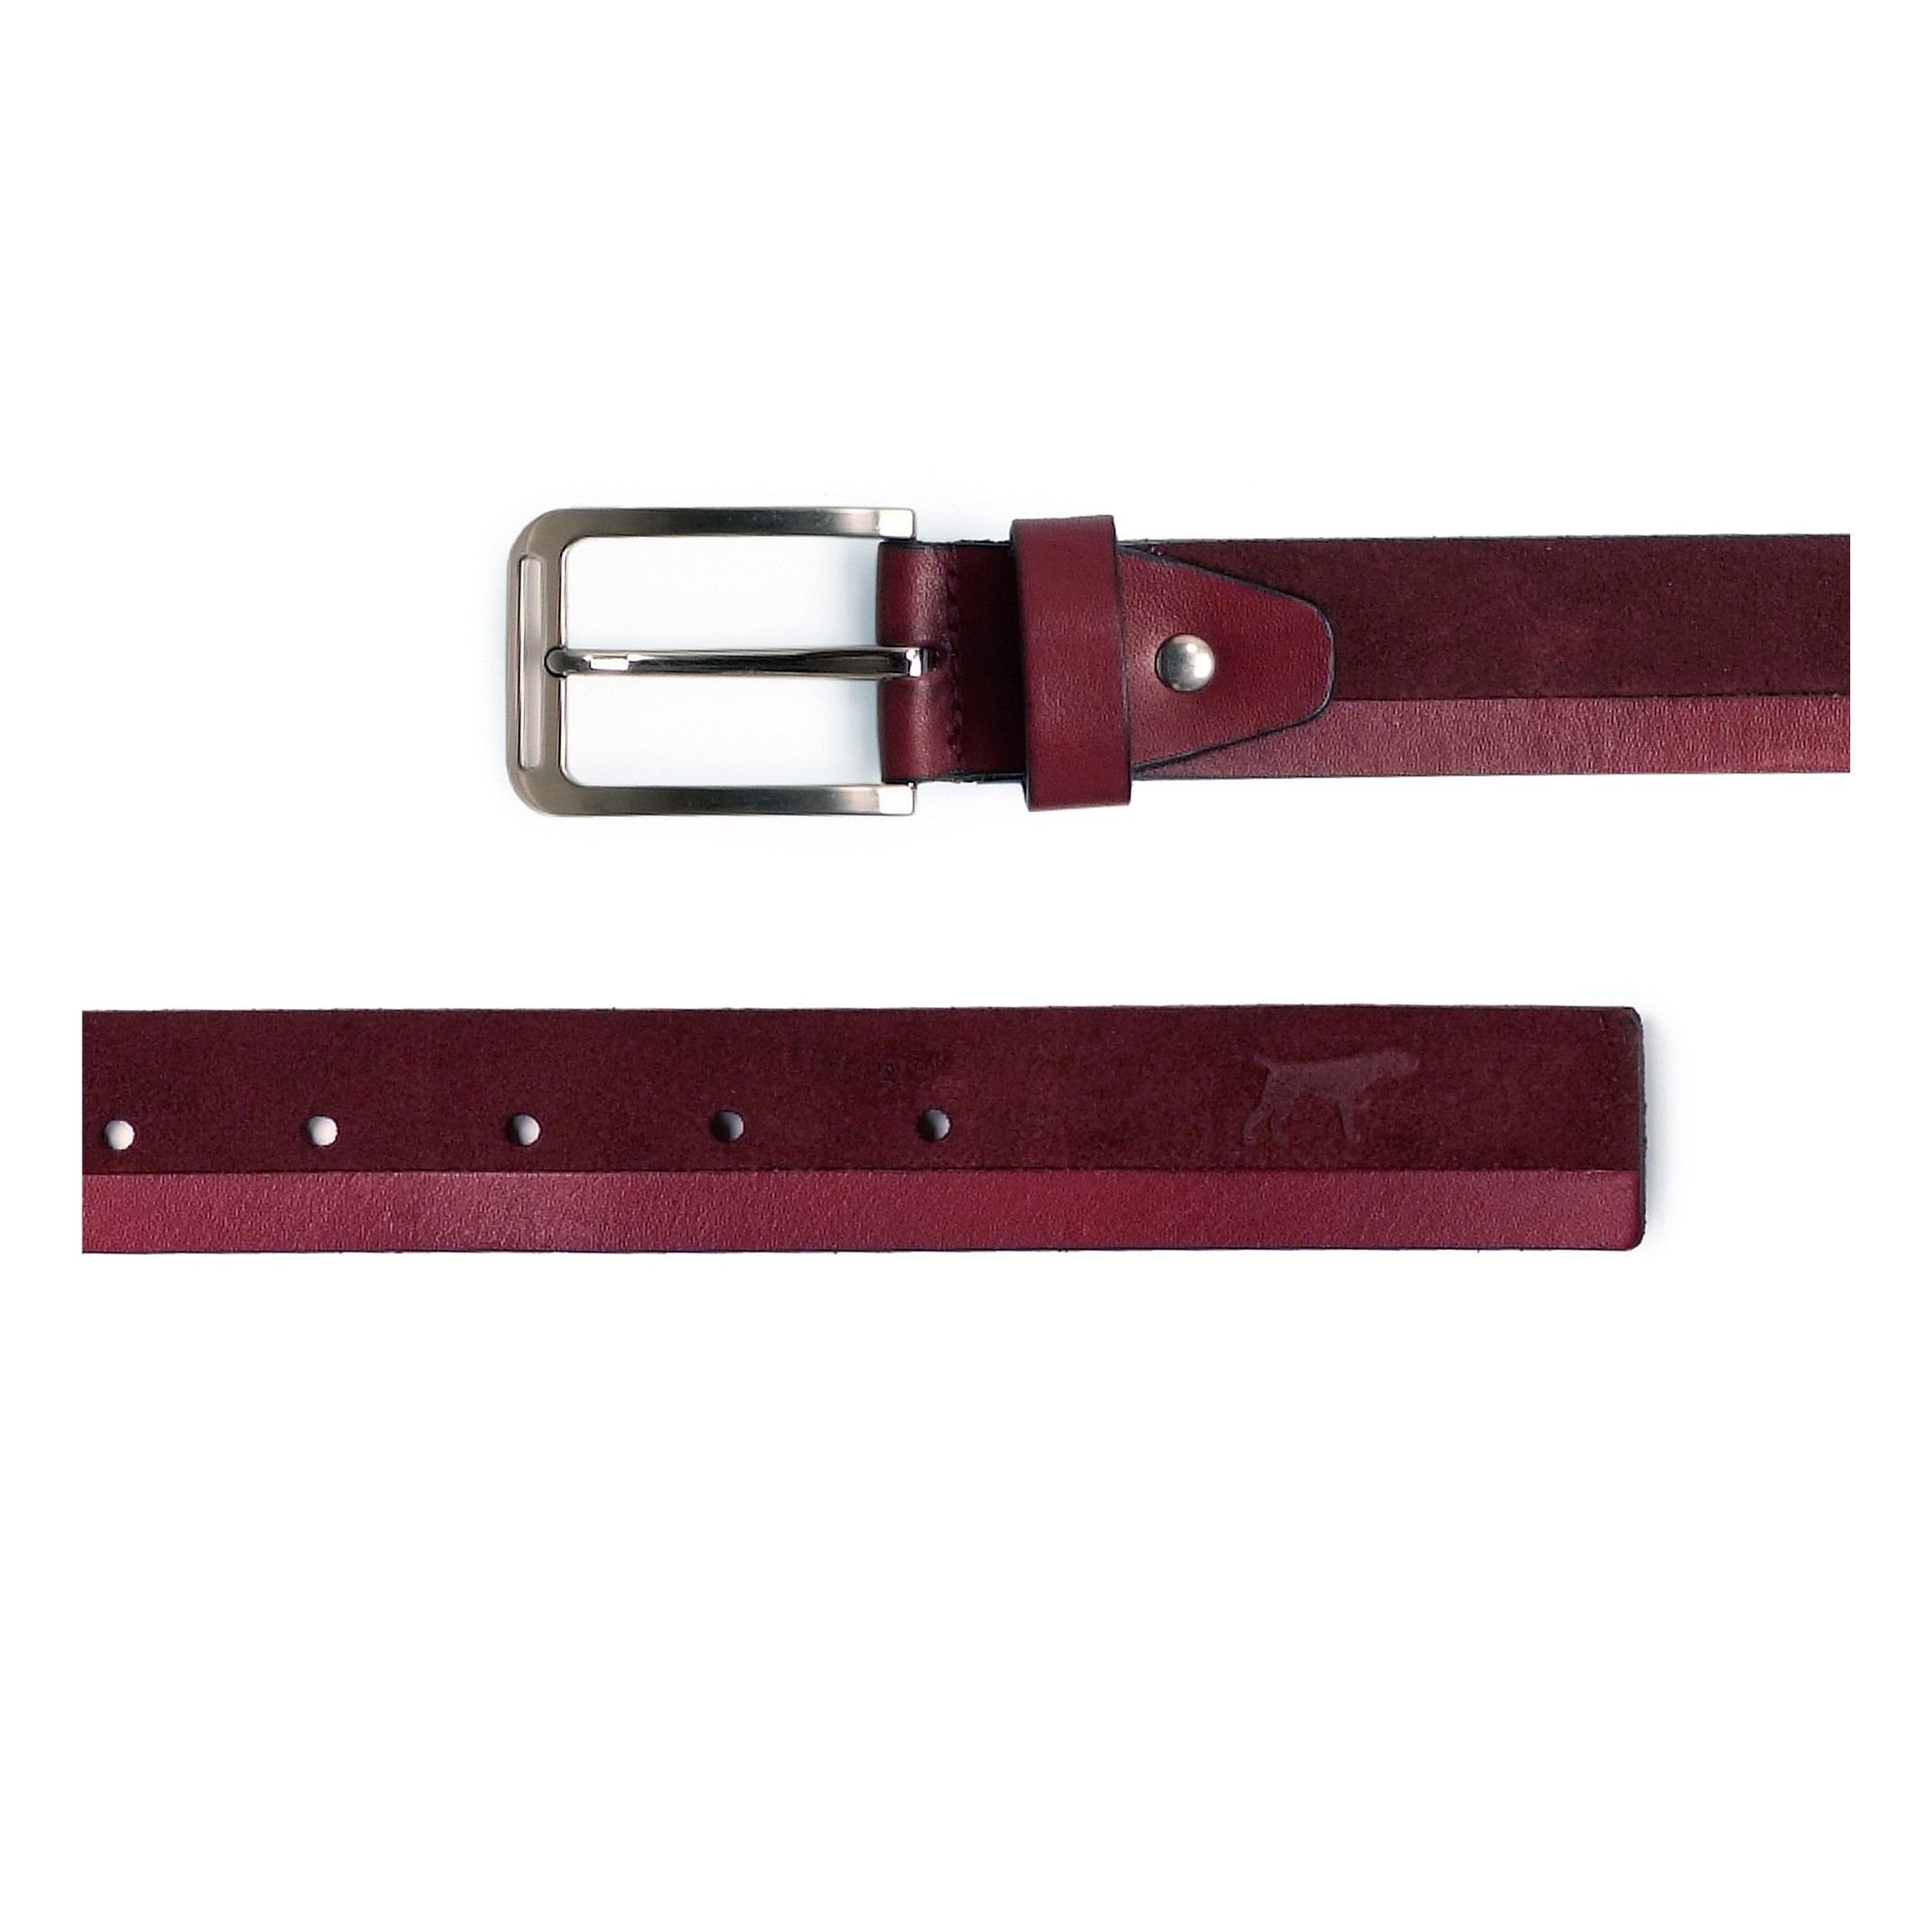 Adjustable belt. Classic leather. Removable metal buckle to adapt the belt. Width of 3,5 cm. Large of 100 cm & 115 cm. Burgundy color. Classic style.